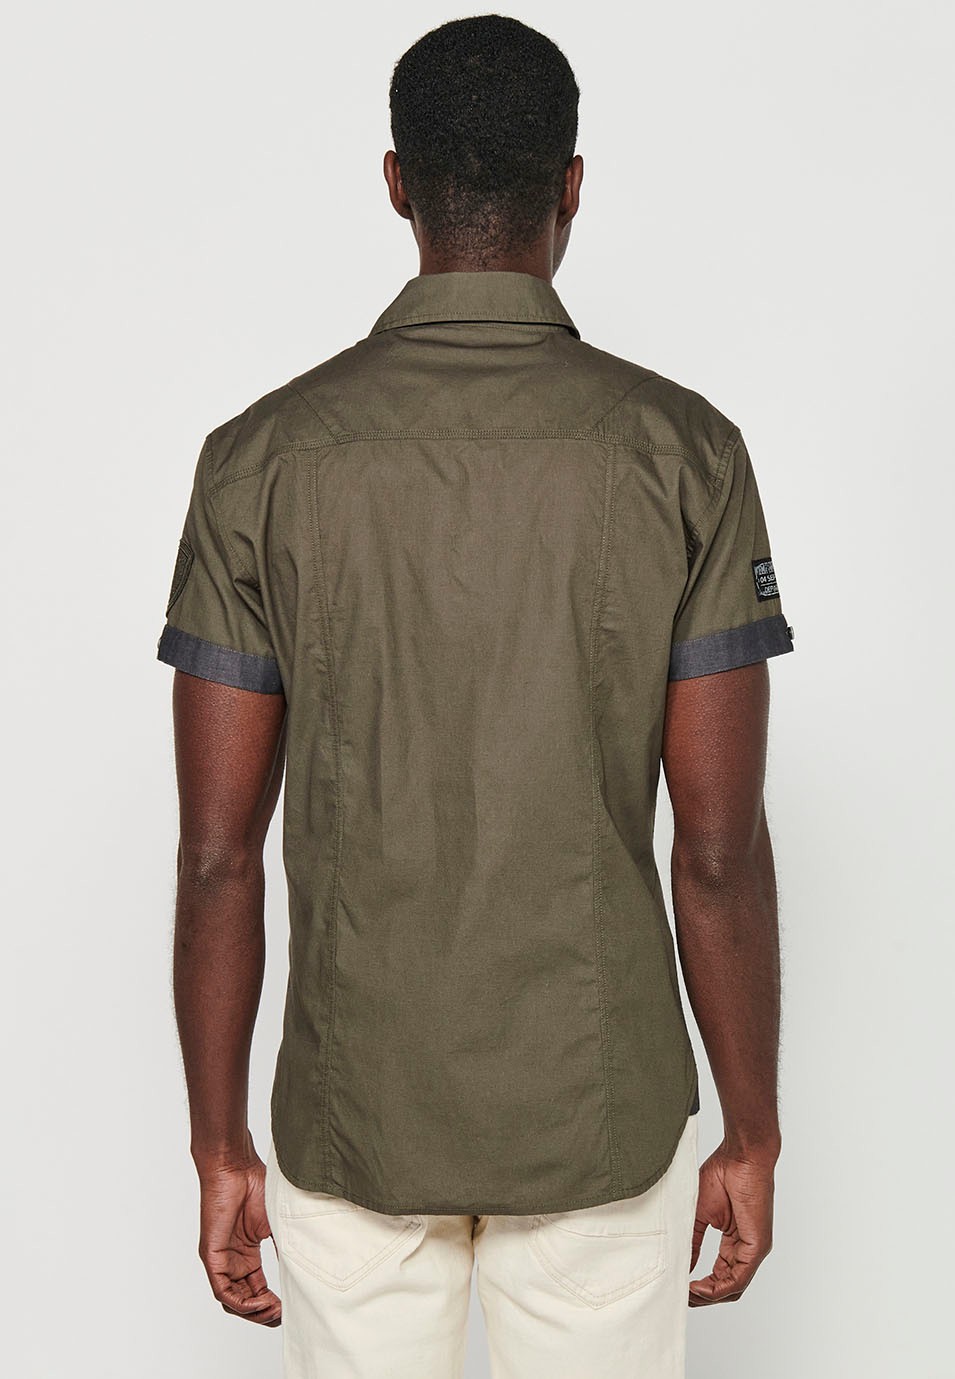 Short Sleeve Cotton Shirt with Button Front Closure and Front Flap Pockets in Olive Color for Men 6